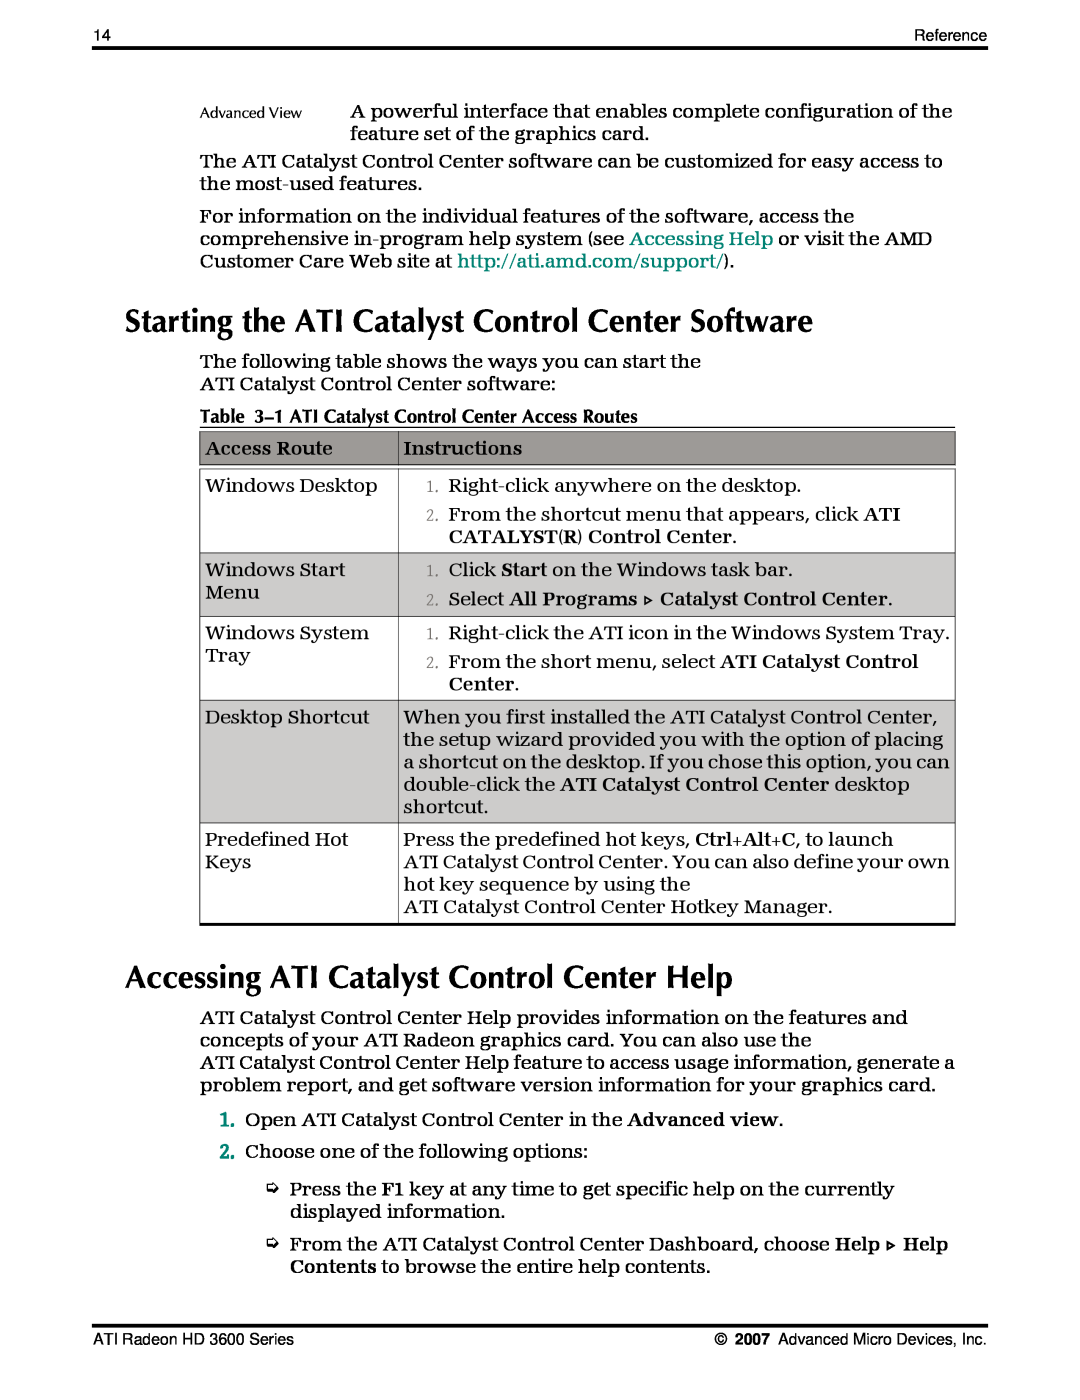 AMD 3600 manual Starting the ATI Catalyst Control Center Software, Accessing ATI Catalyst Control Center Help, Access Route 